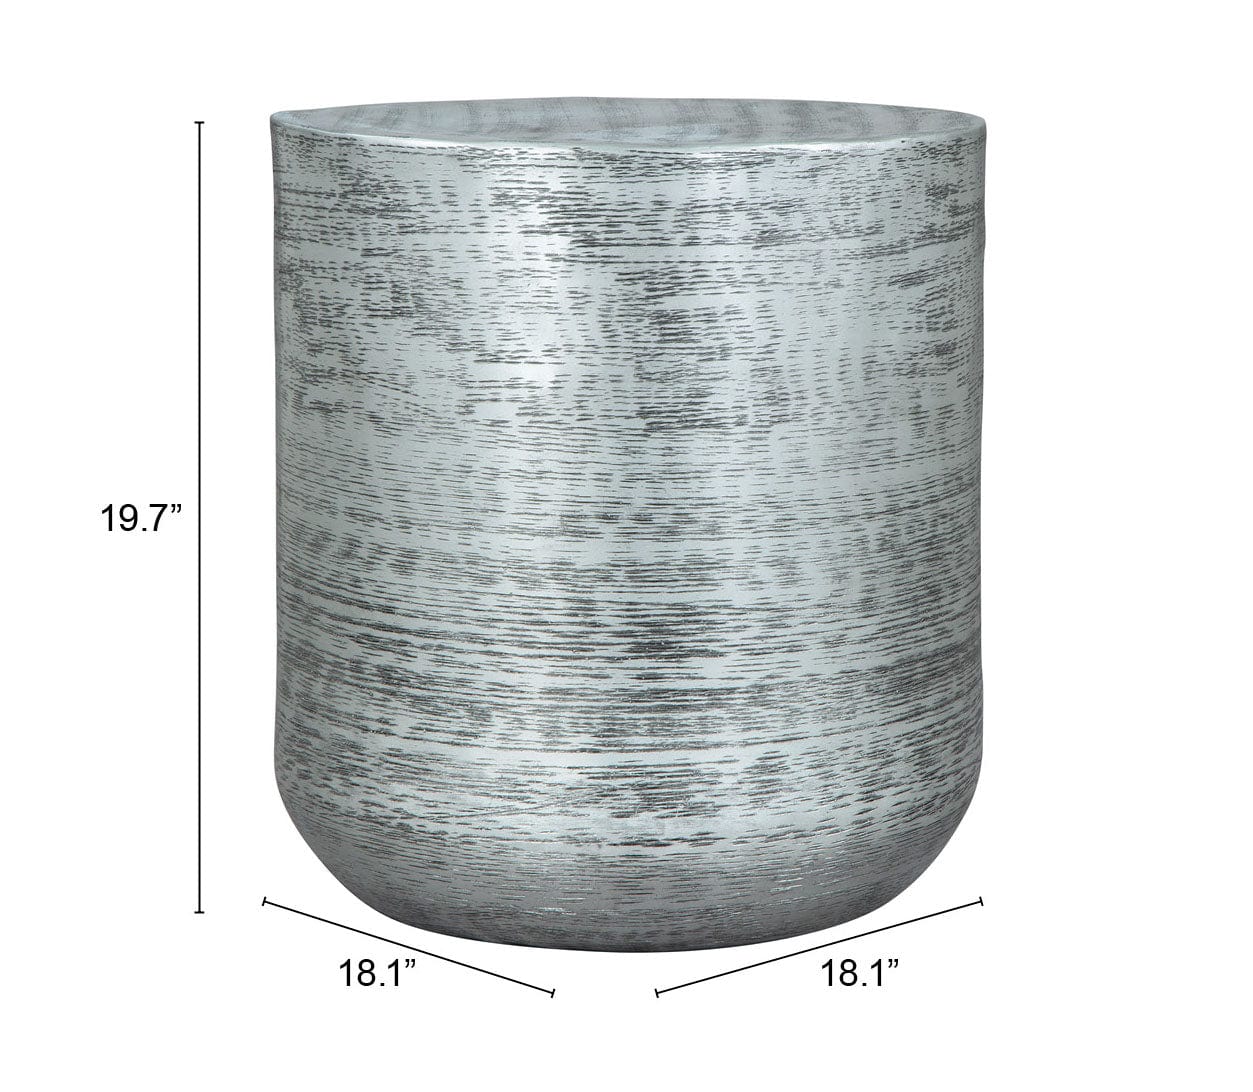 Measurements of Electroplated silver side table